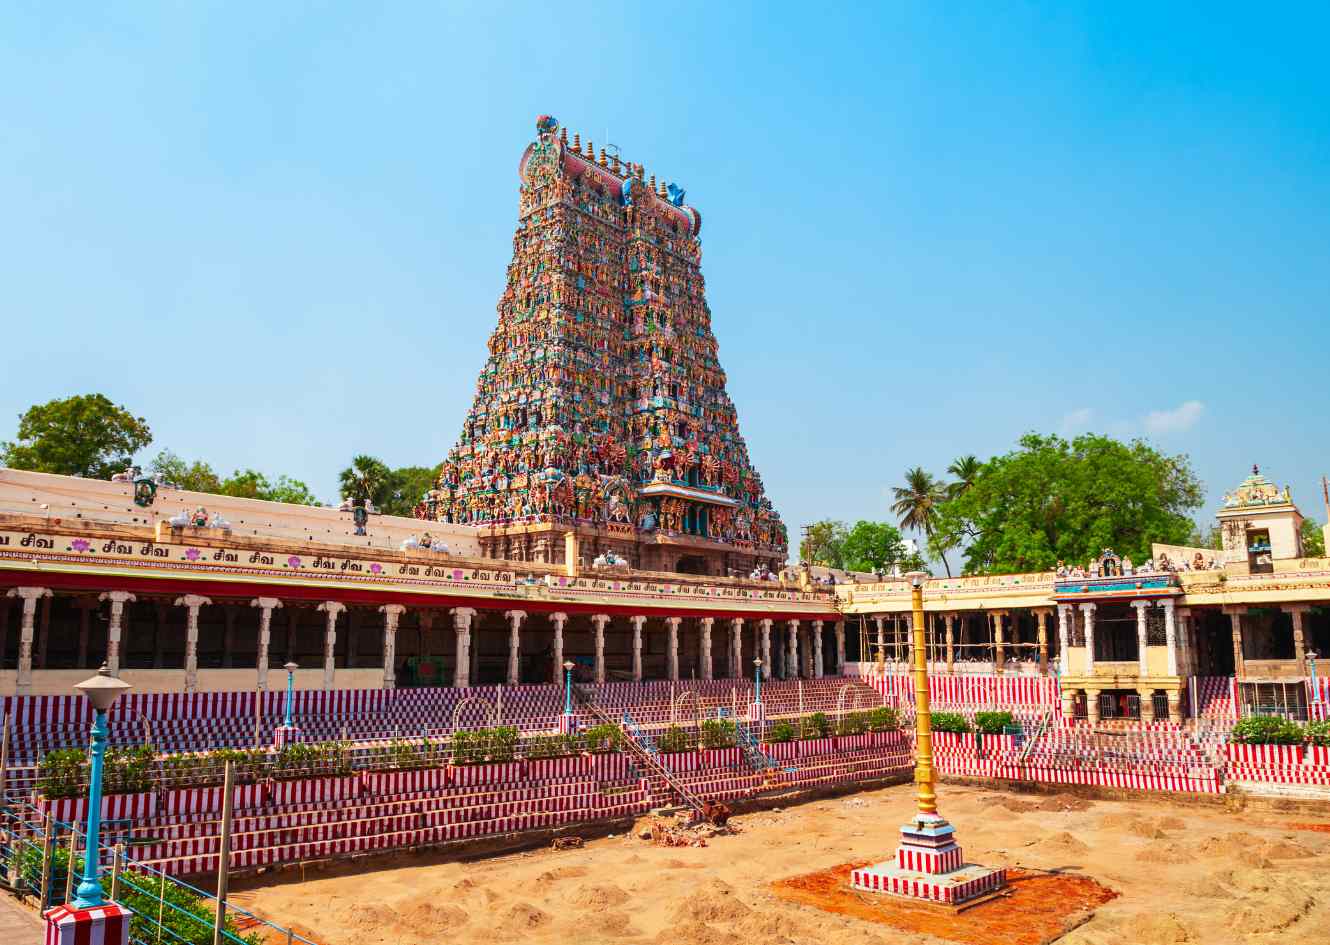 Government control over Hindu temples